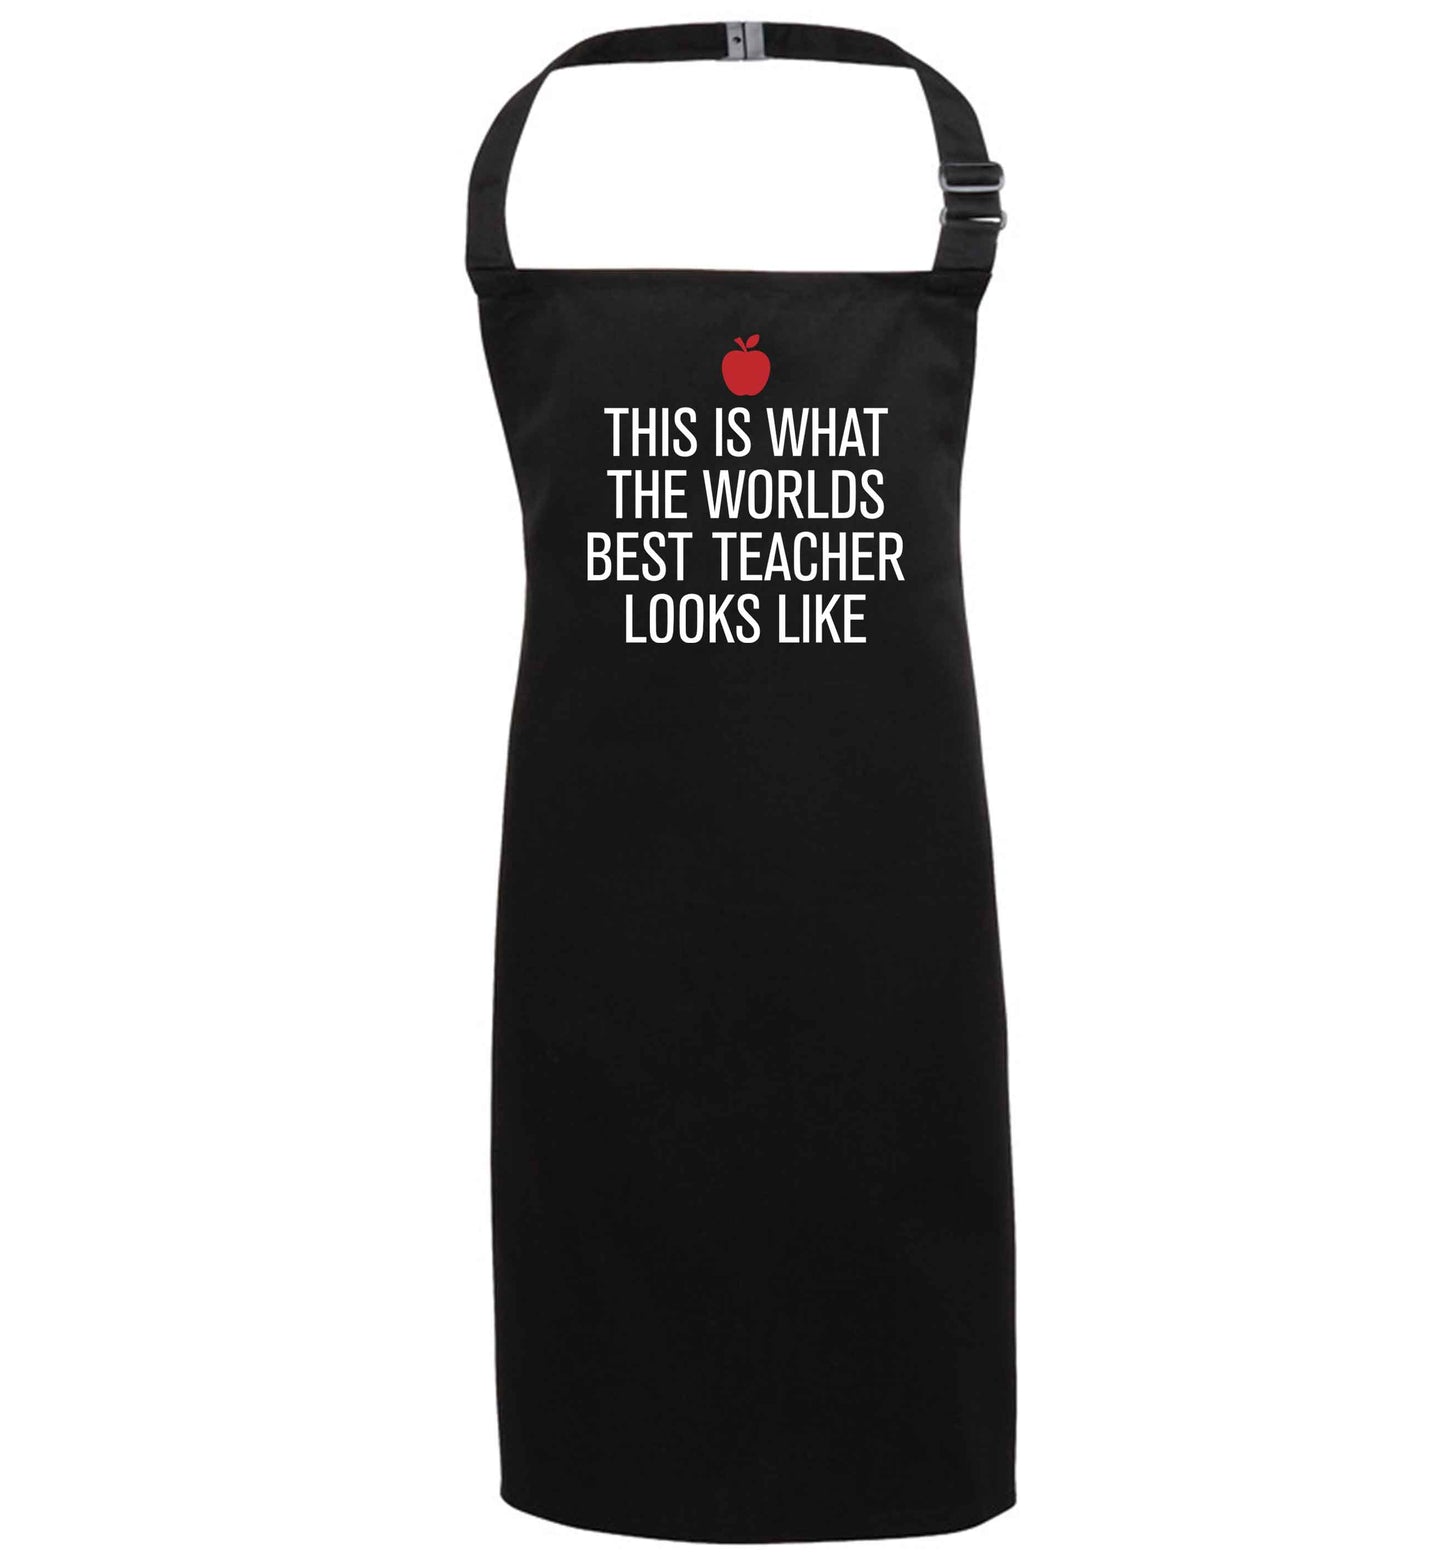 This is what the worlds best teacher looks like black apron 7-10 years